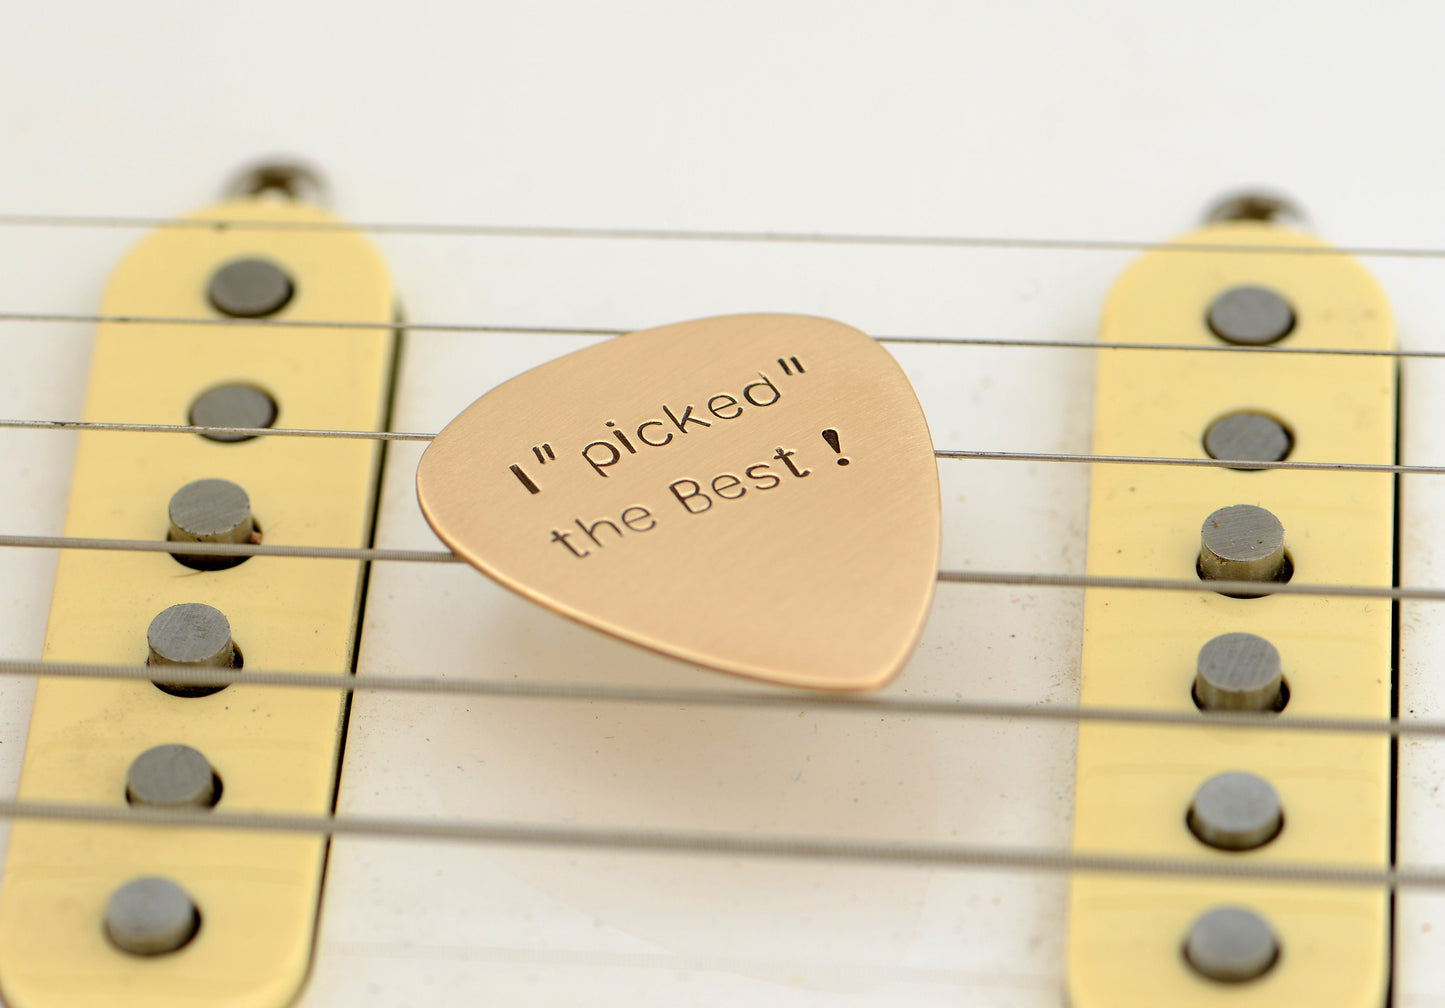 "I picked the best" guitar pick in bronze - playable